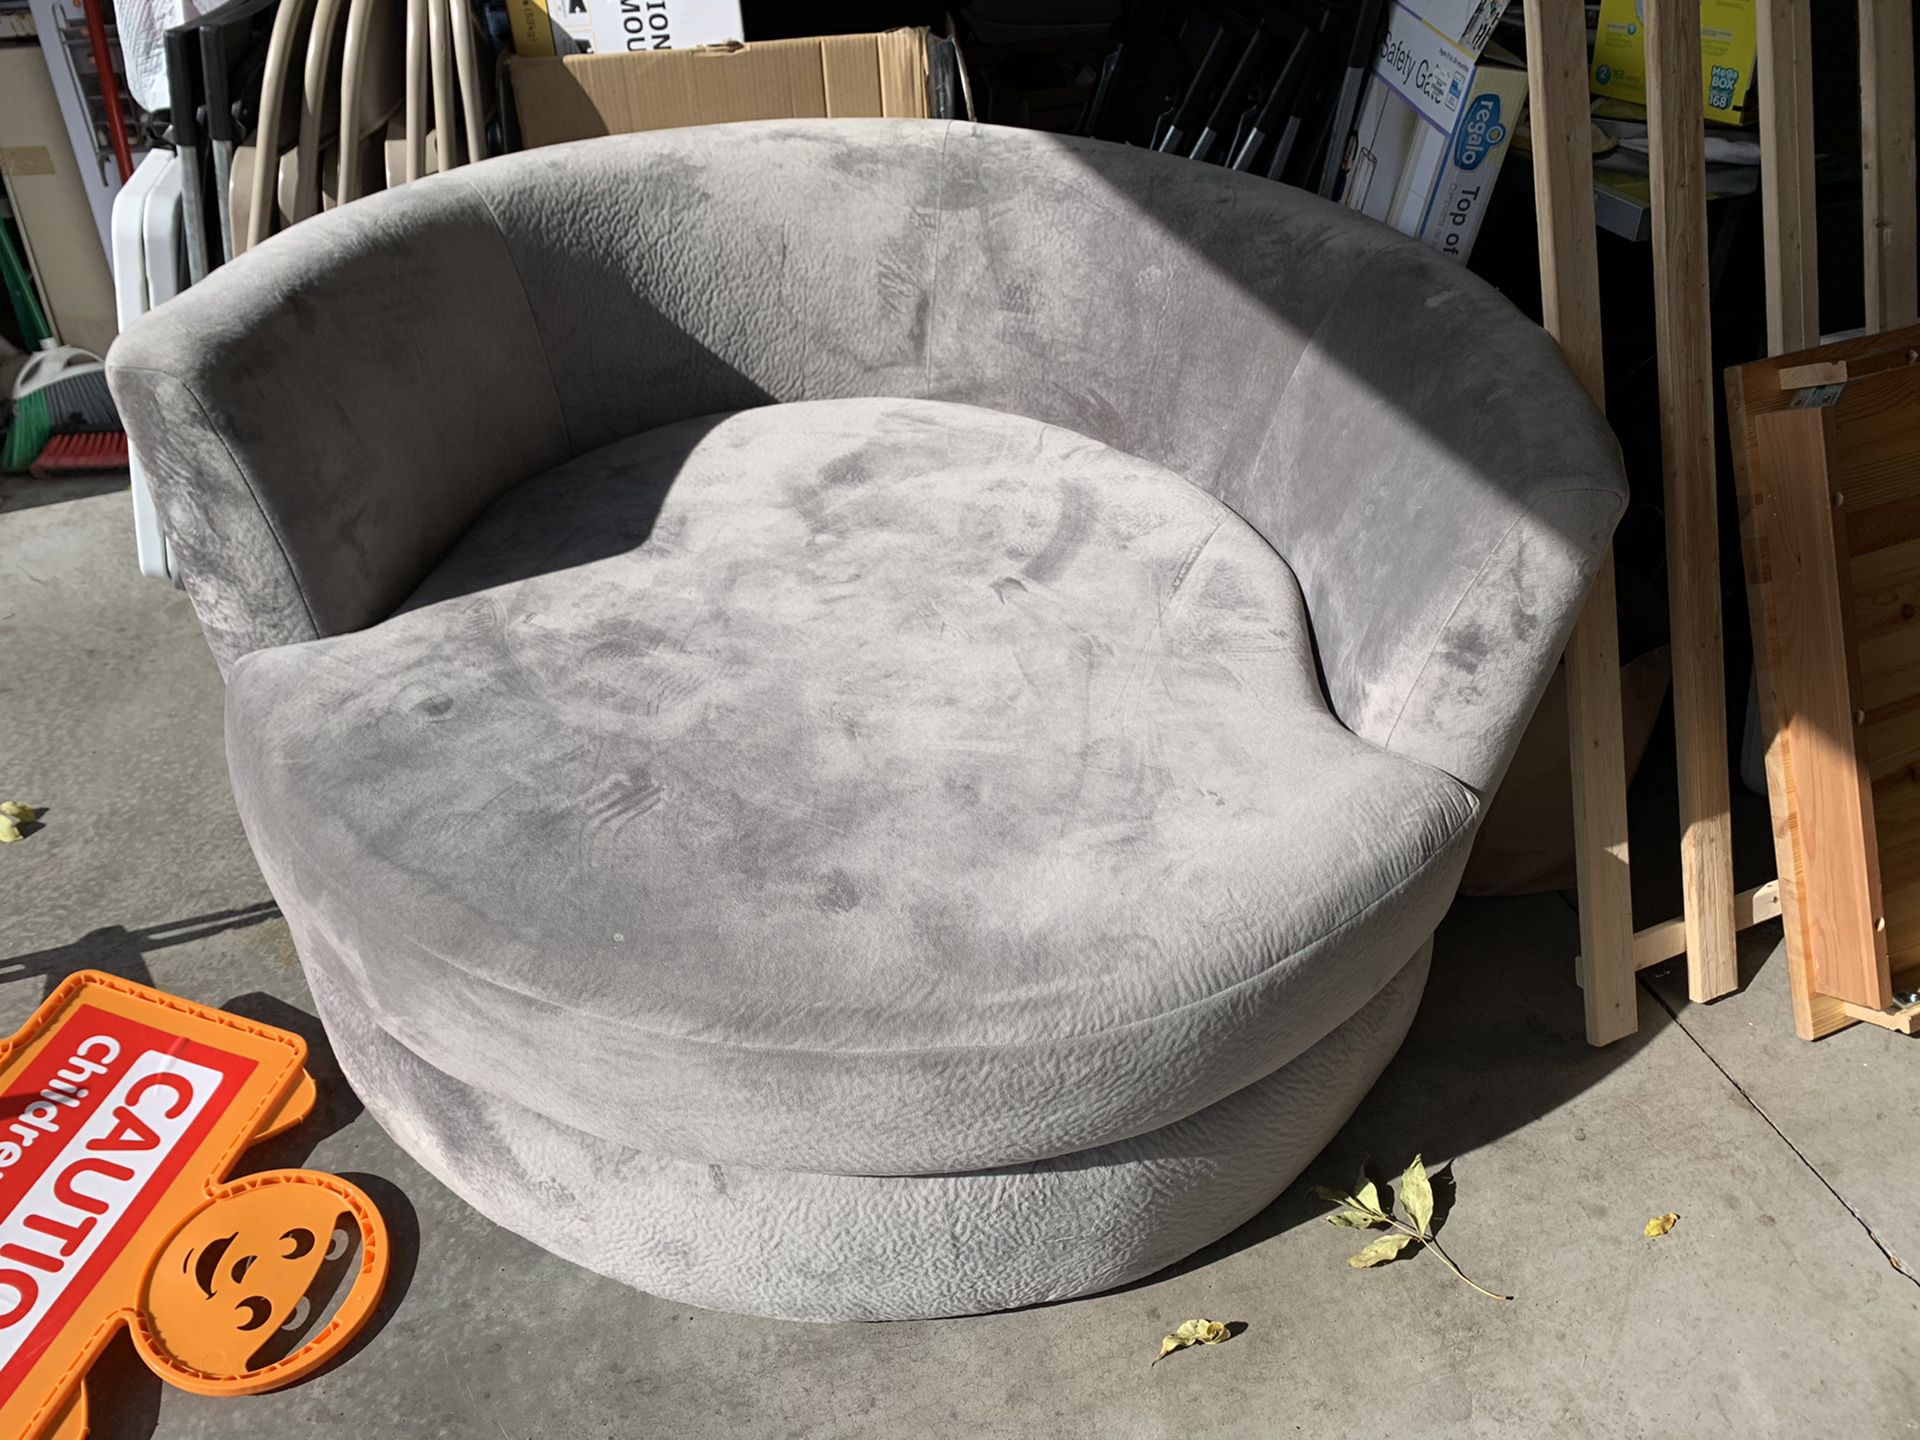 Very clean round couch